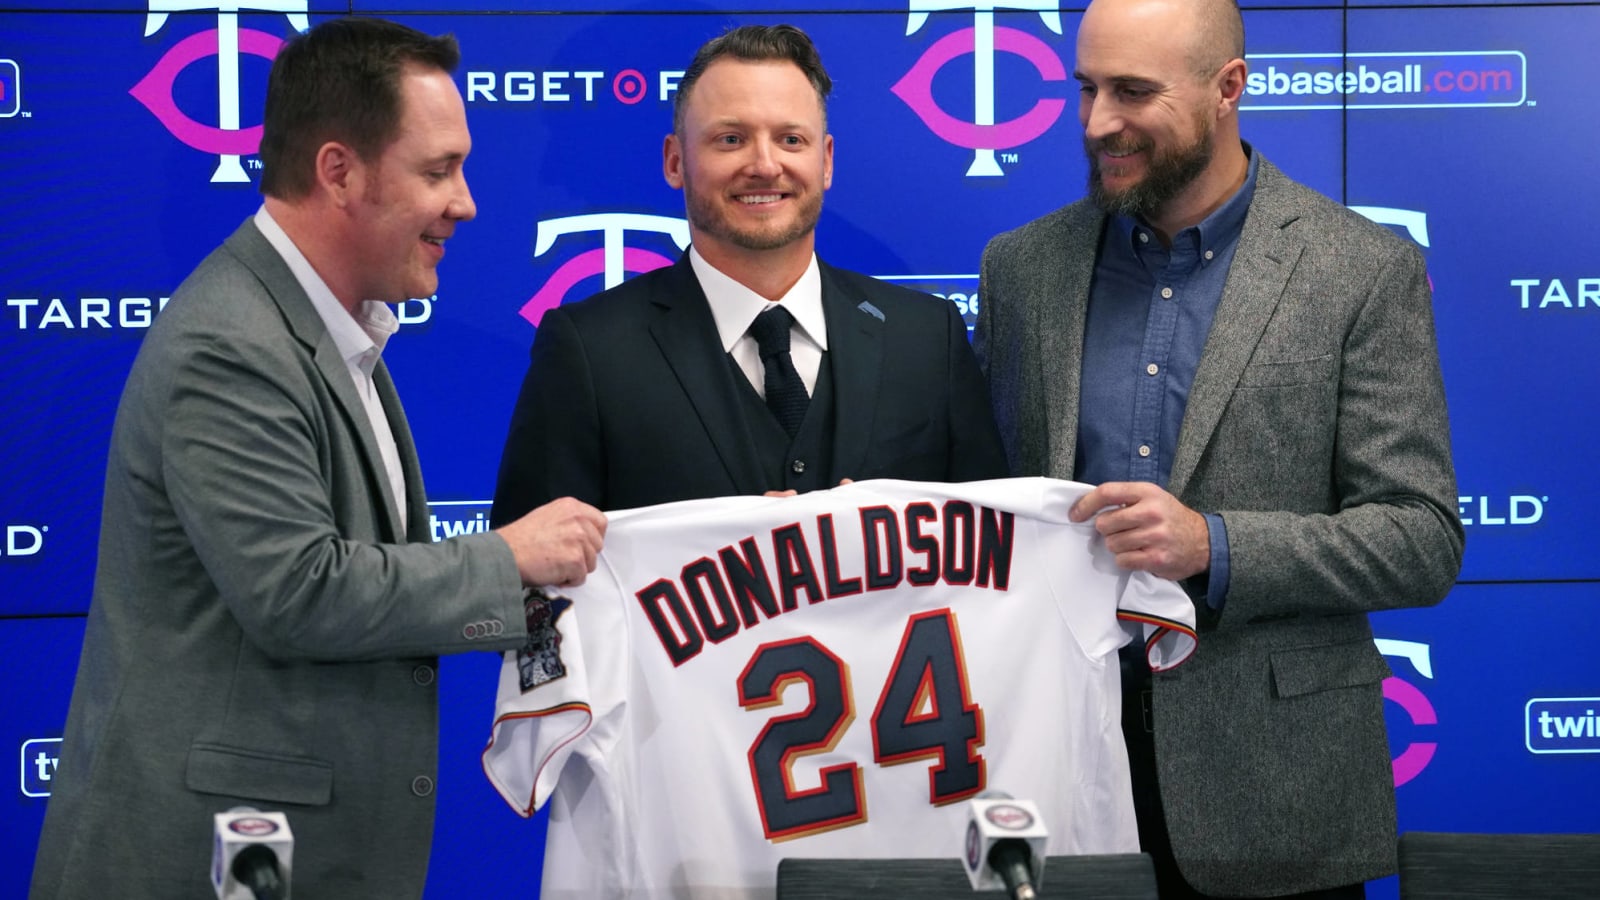 The top 2020 offseason addition for each MLB team